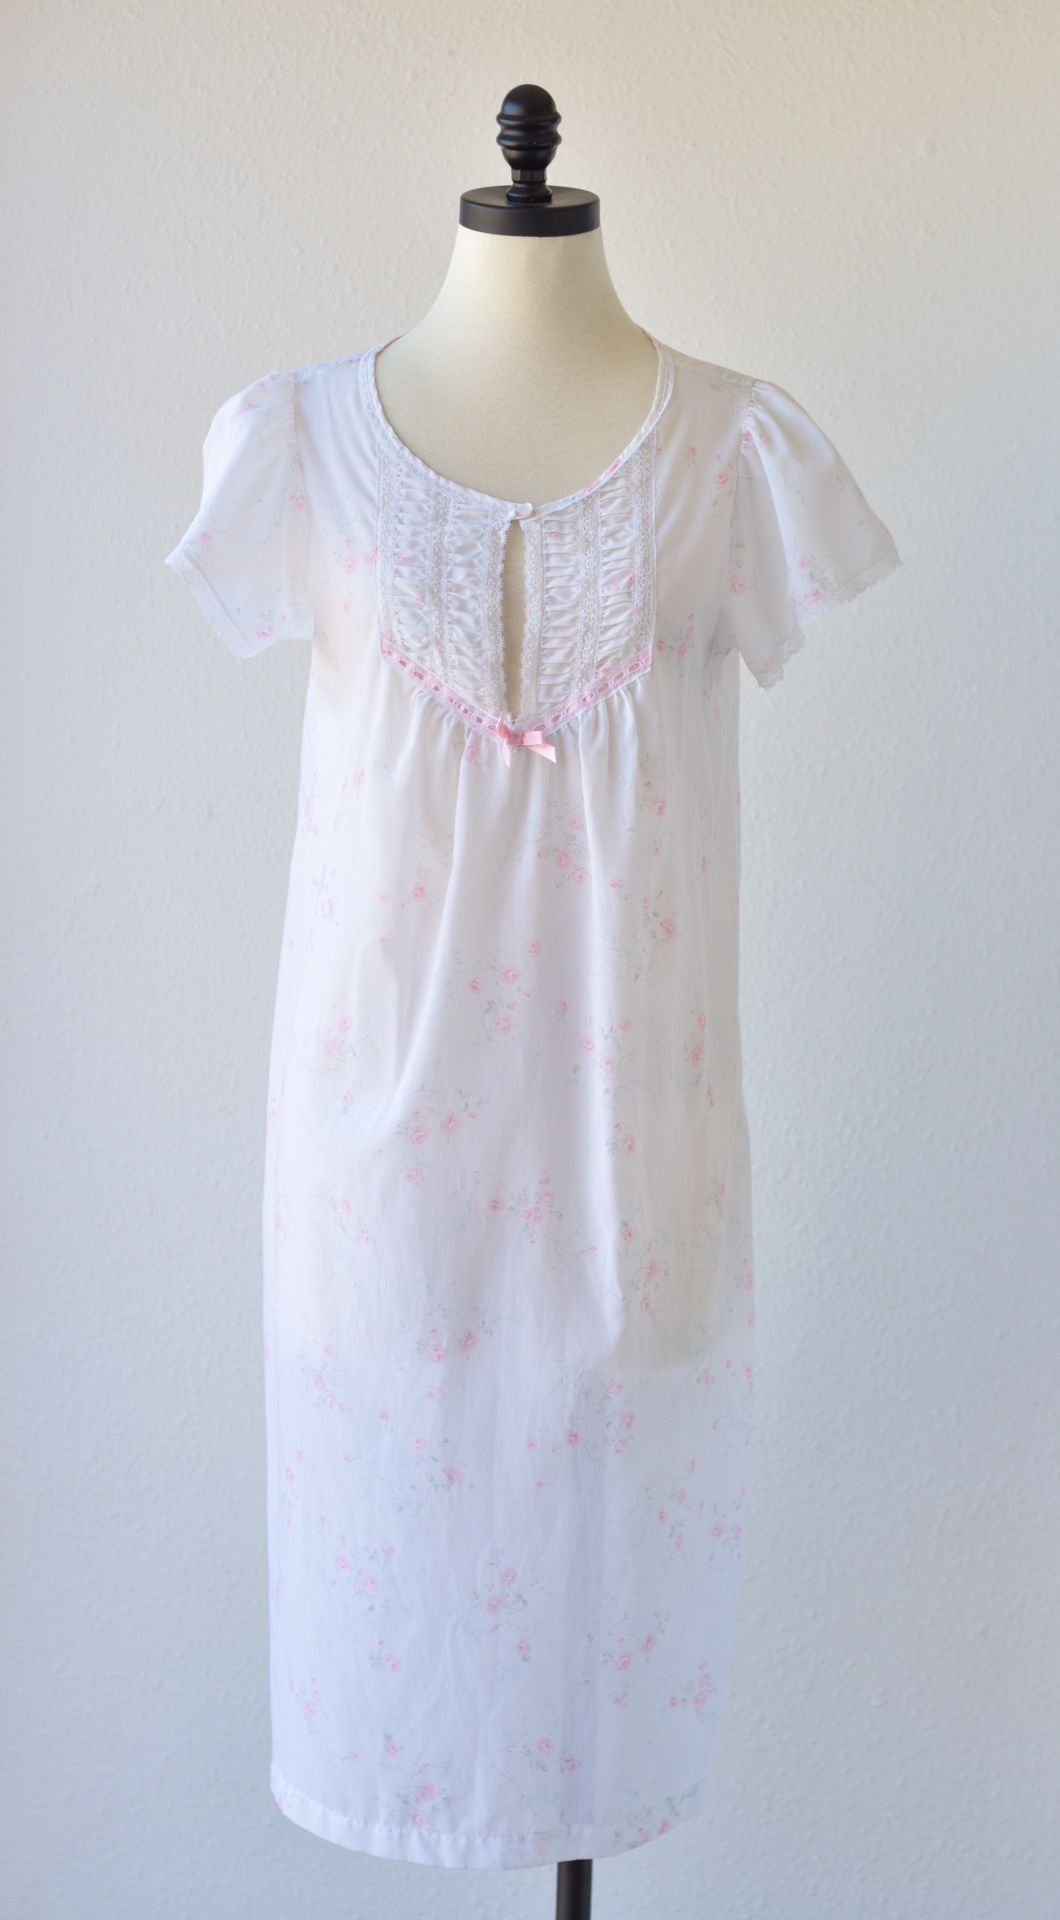 50s Vintage BARBIZONE Nightgown, Soft White Keyhole Scoop Neck, Ribbon and Lace Bib, Short Puffed Cape Sleeves, Semi Sheer, Floral Nightgown